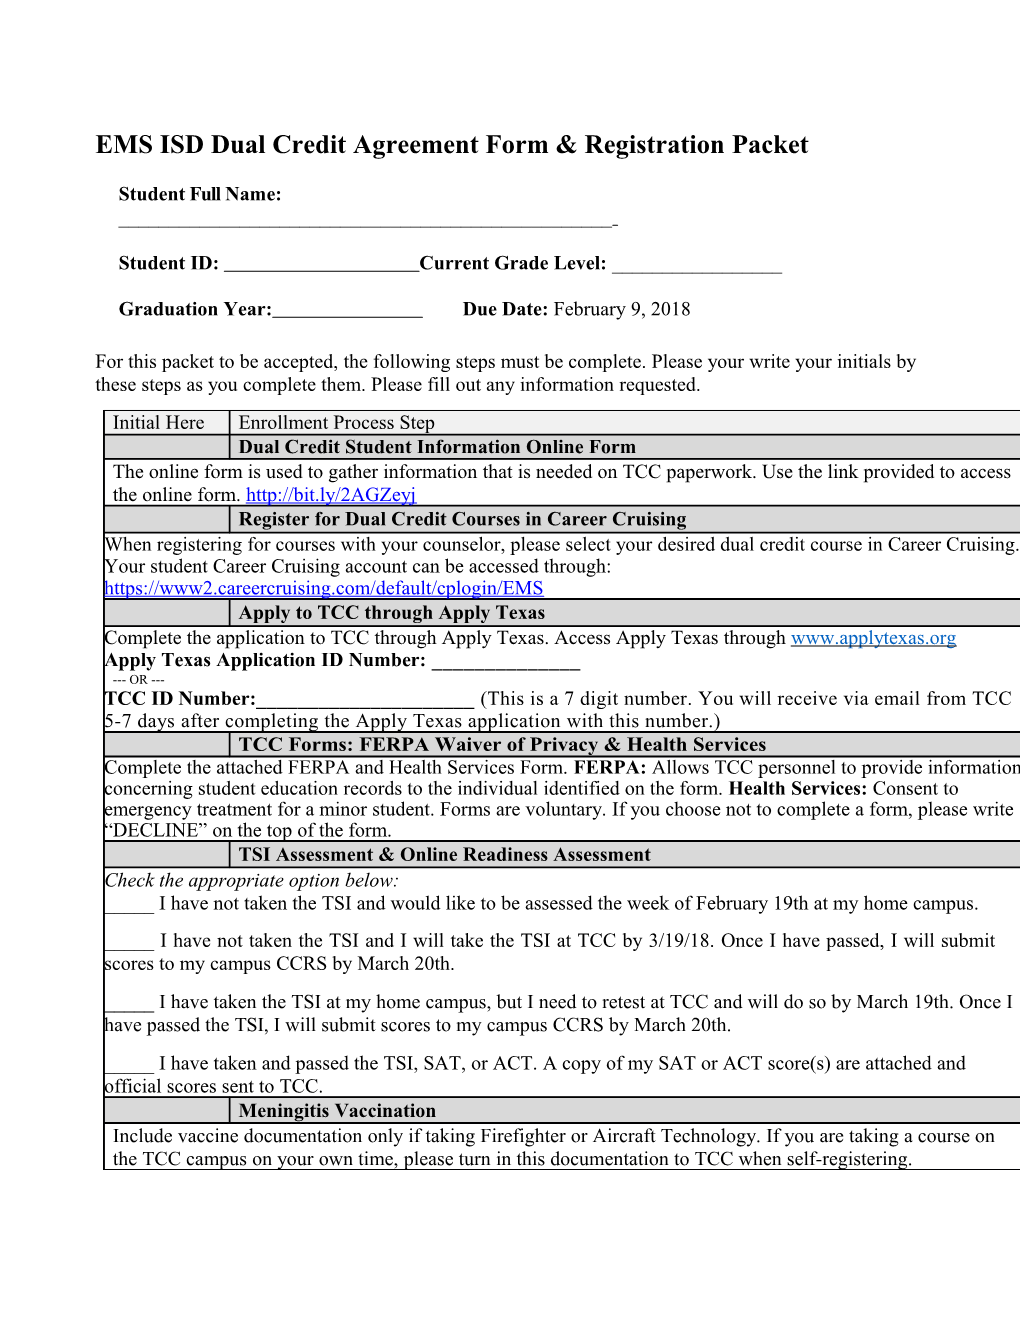 EMS ISD Dual Credit Agreement Form & Registration Packet